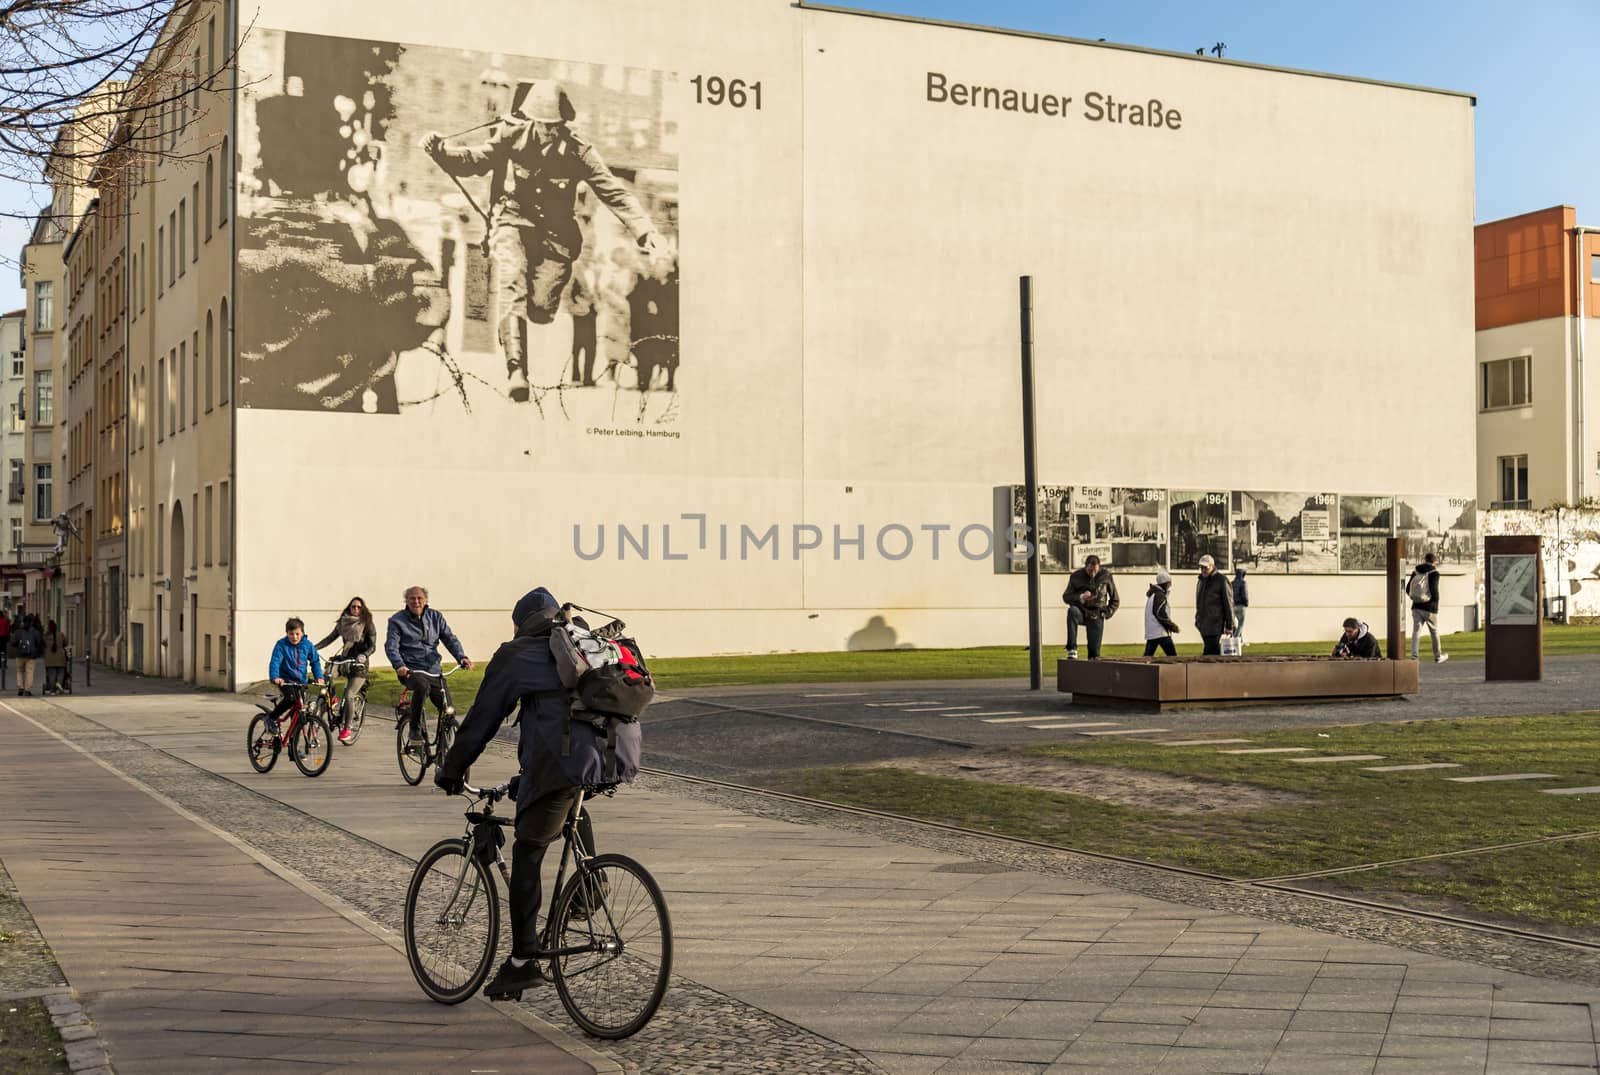 BERLIN - APRIL 3: The Berlin Wall Memorial in Bernauer strasse. This is the intersection with Acker strasse and the photos depict the place over the years on April 3, 2015 in Berlin, Germany.